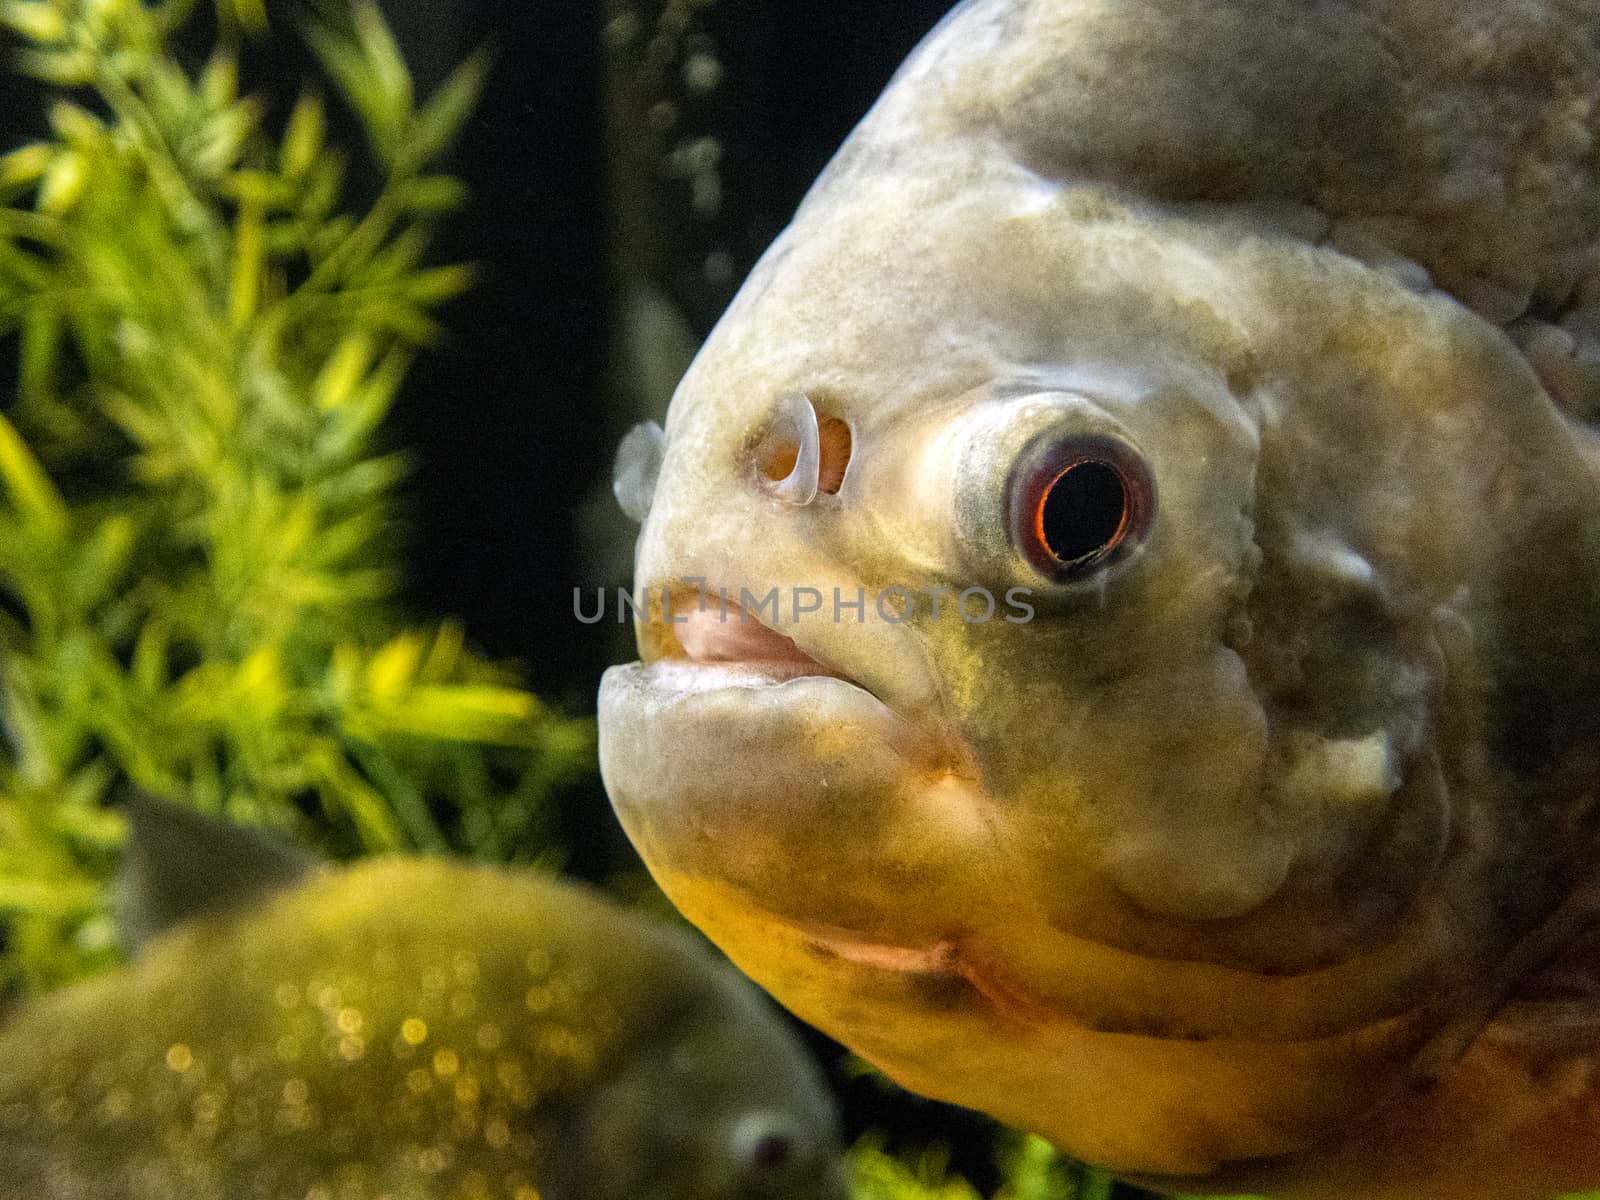 Red-bellied piranha by thomas_males